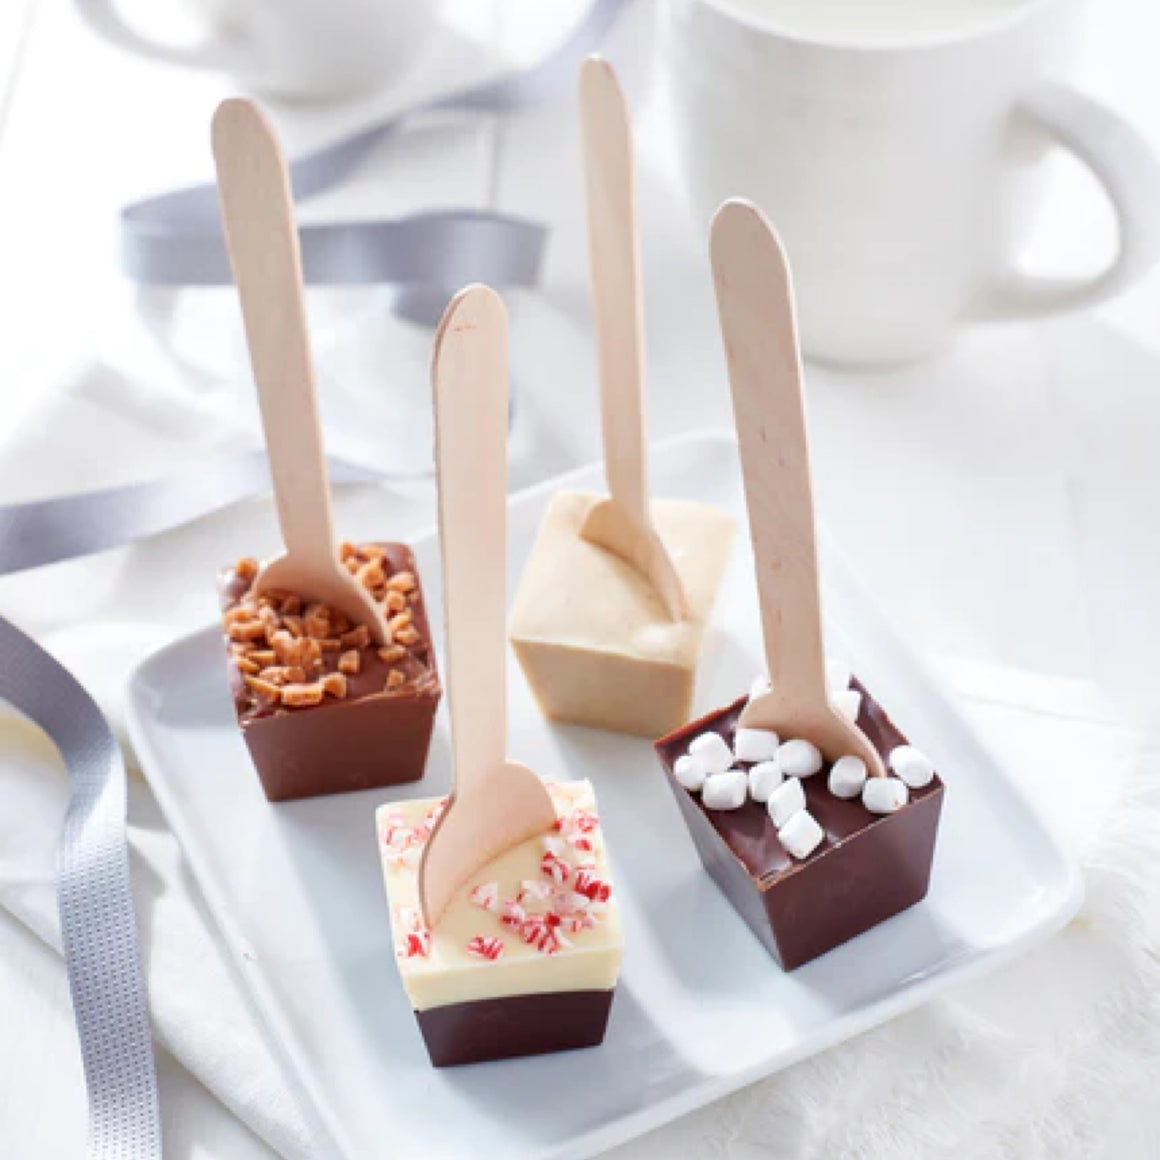 ARTISANAL CONFECTIONS - HOT CHOCOLATE STIR SPOON GIFT BOX